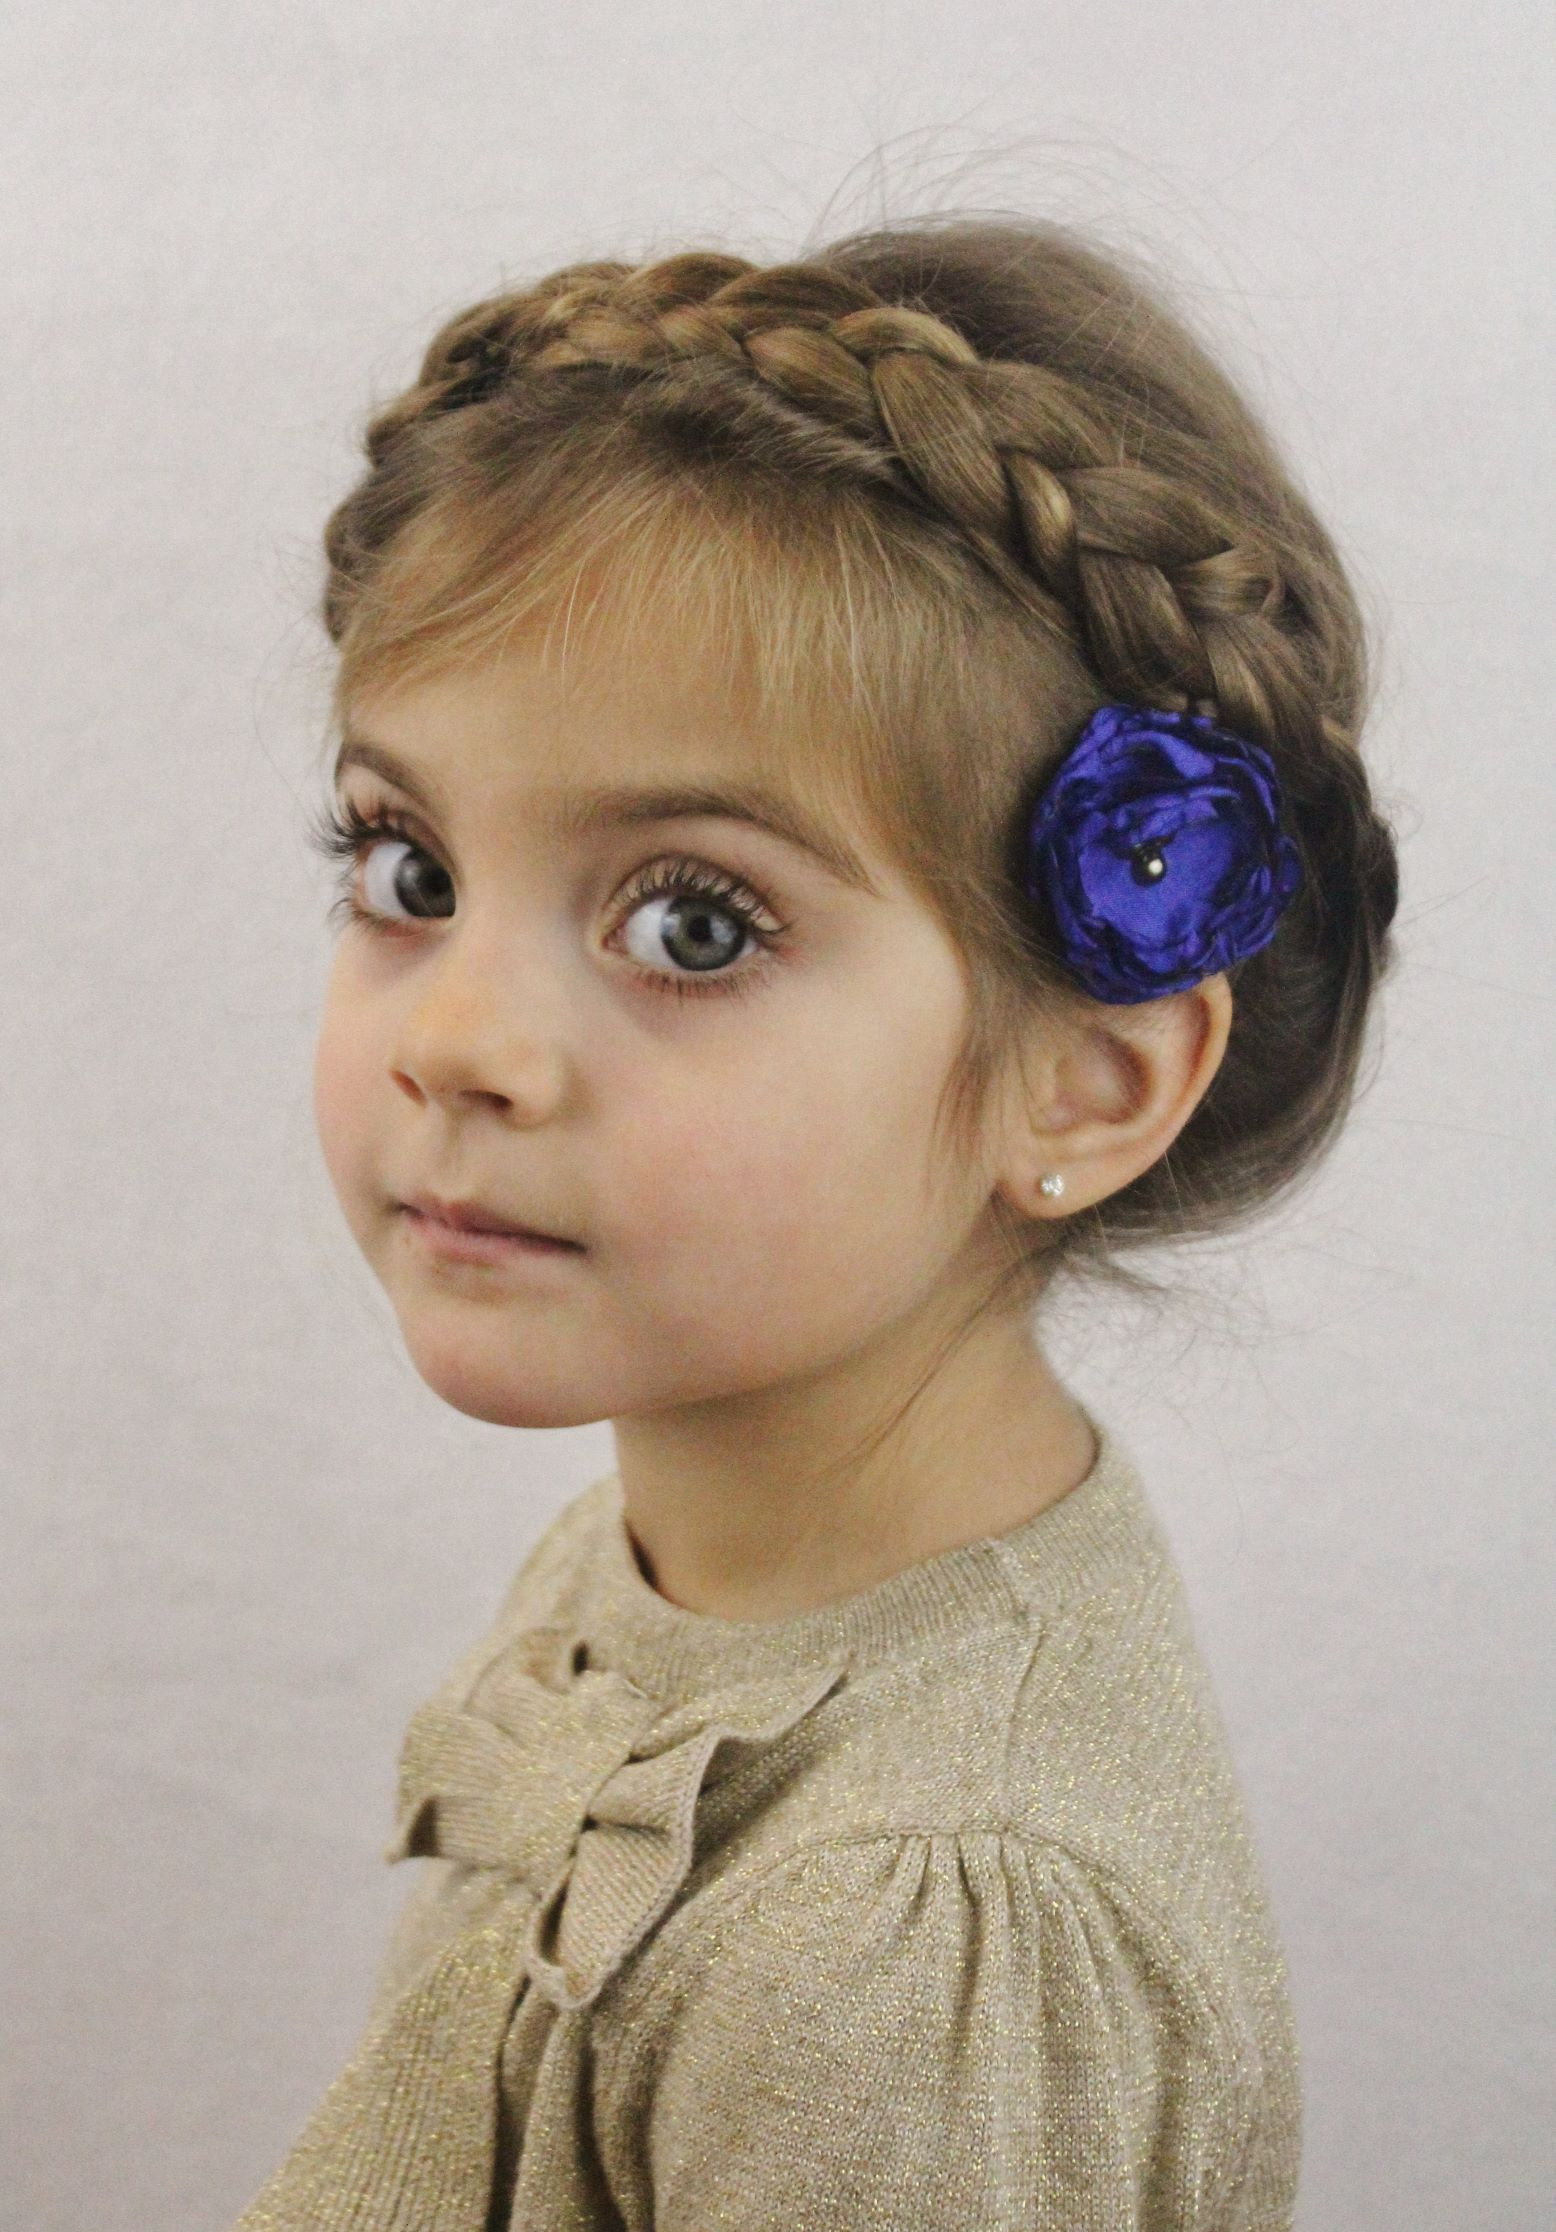 Kids Updos Hairstyles
 Cute Christmas Party Hairstyles for Kids